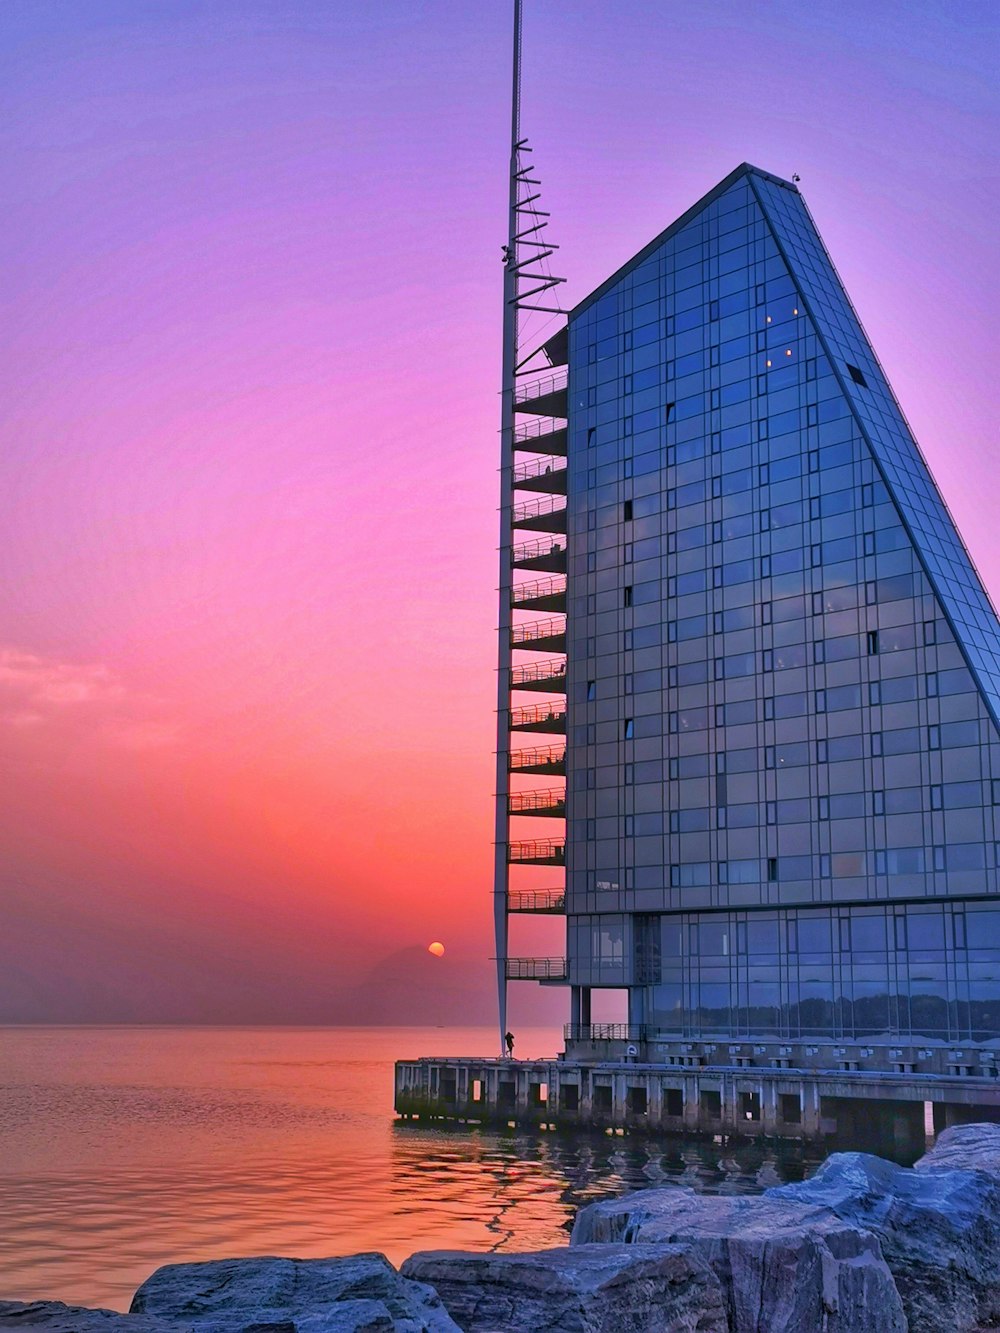 glass building near body of water during sunset